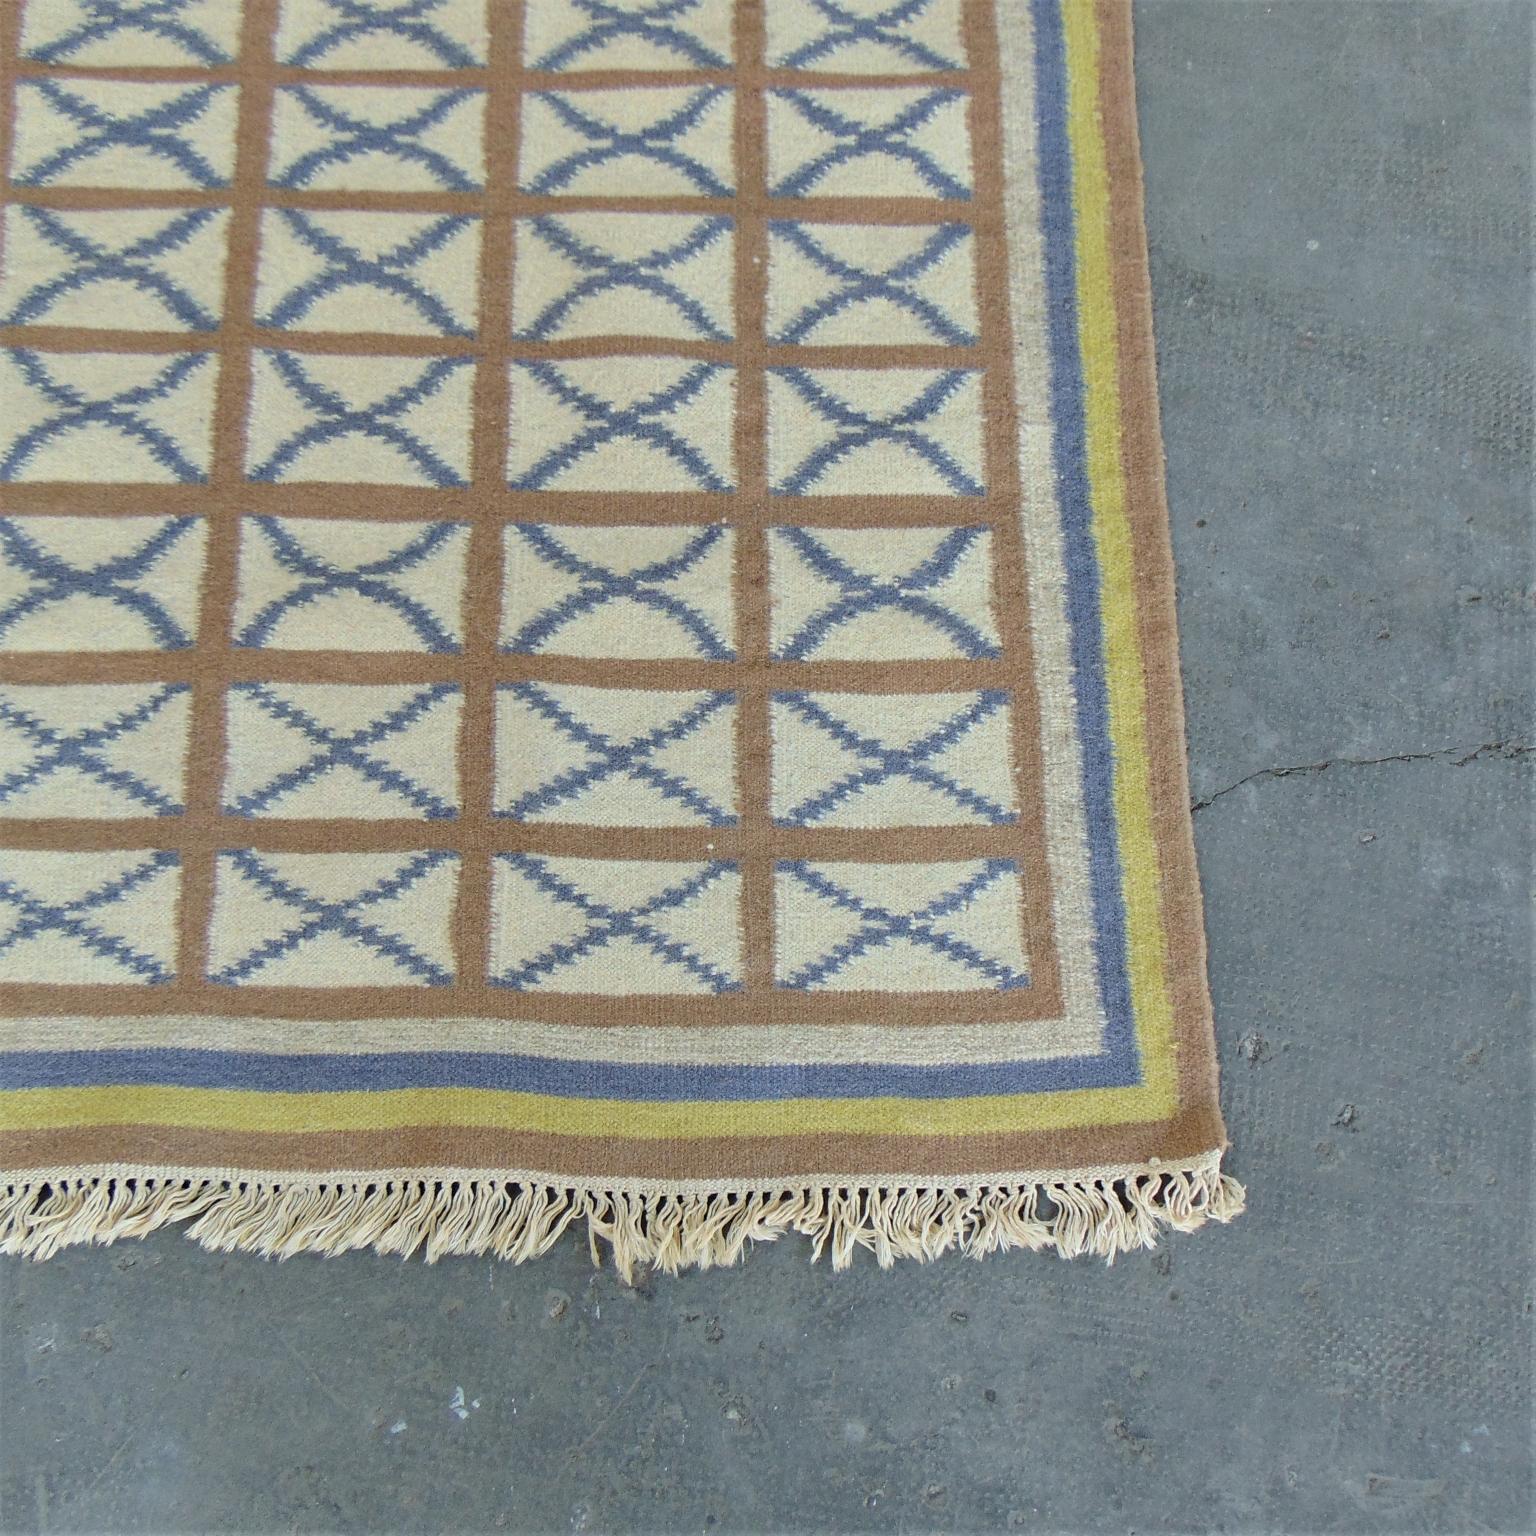 1975 Handwoven Kilim Vintage Indian Rug Blue Brown Yellow Ivory Background India In Excellent Condition For Sale In Arosio, IT